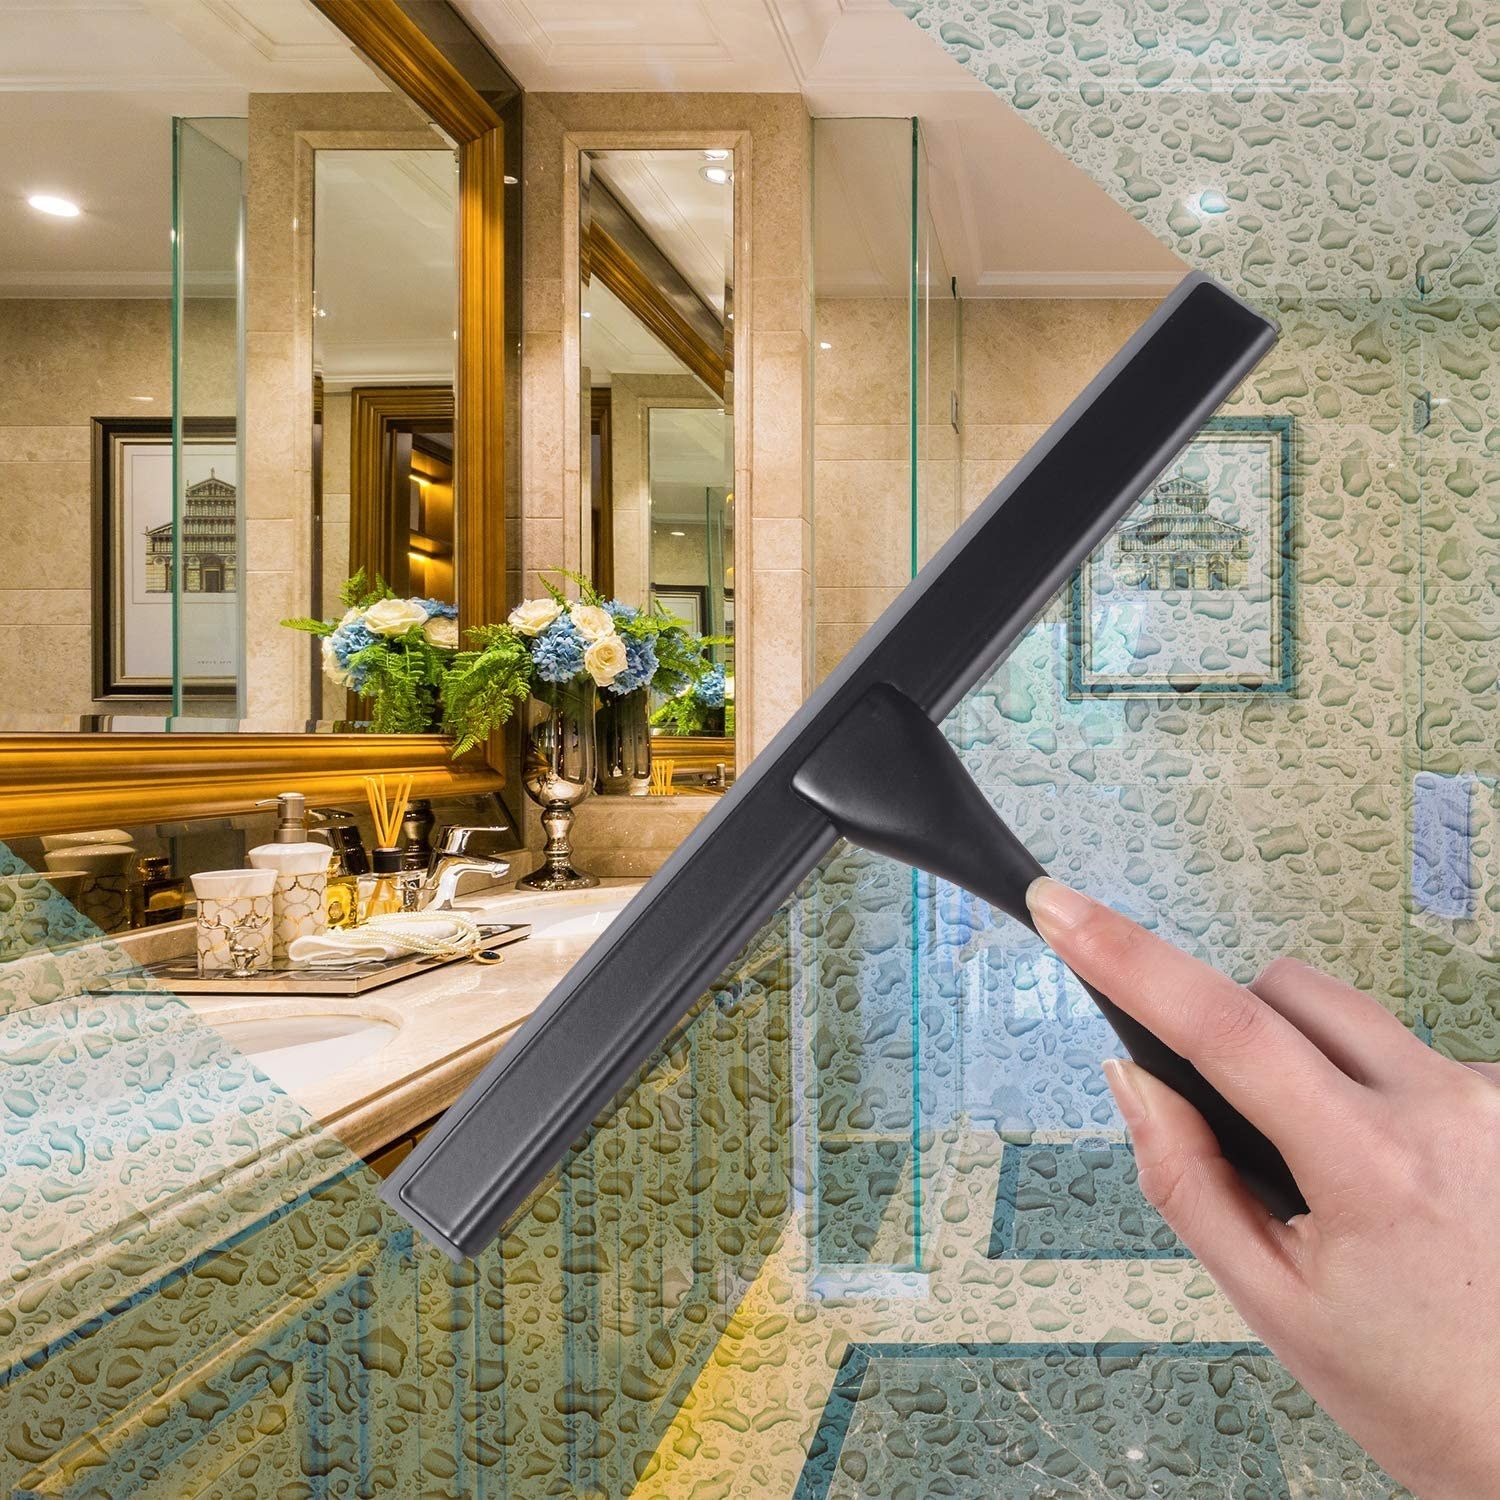 An all-purpose shower squeegee